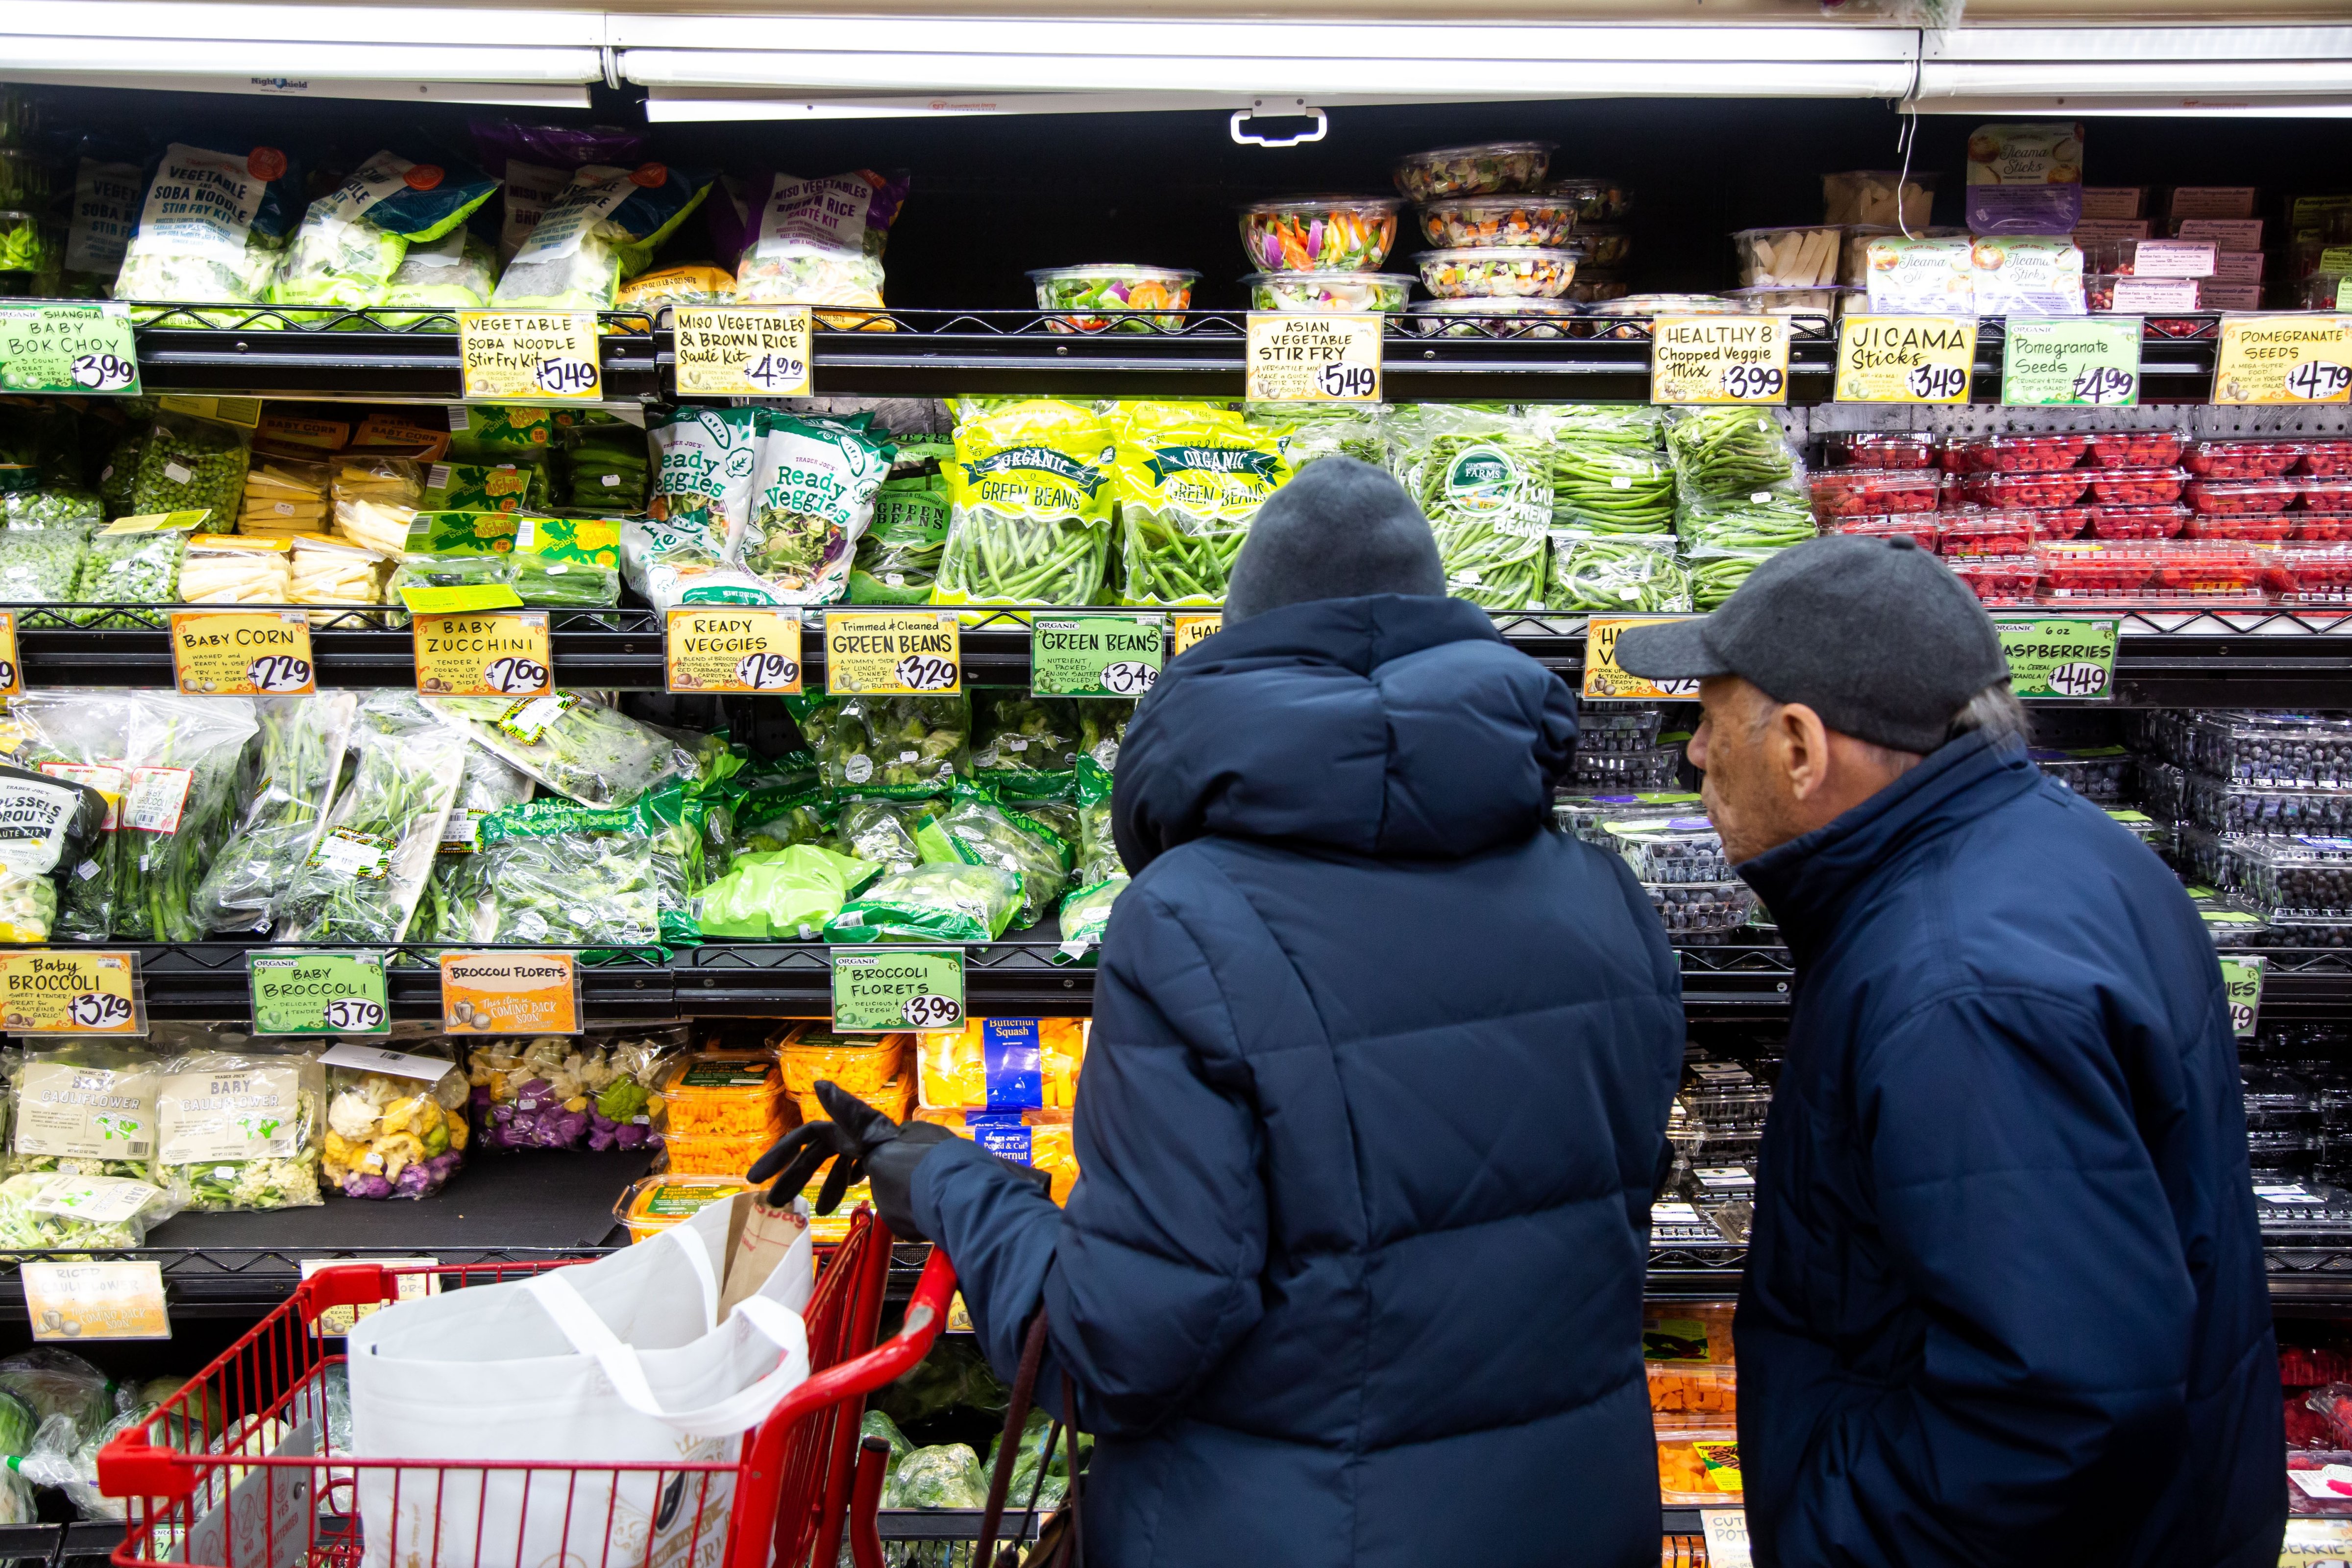 Customers shop at a grocery store in the Brooklyn borough of New York, the United States, Dec. 13, 2022. (Michael Nagle––Xinhua via Getty Images)